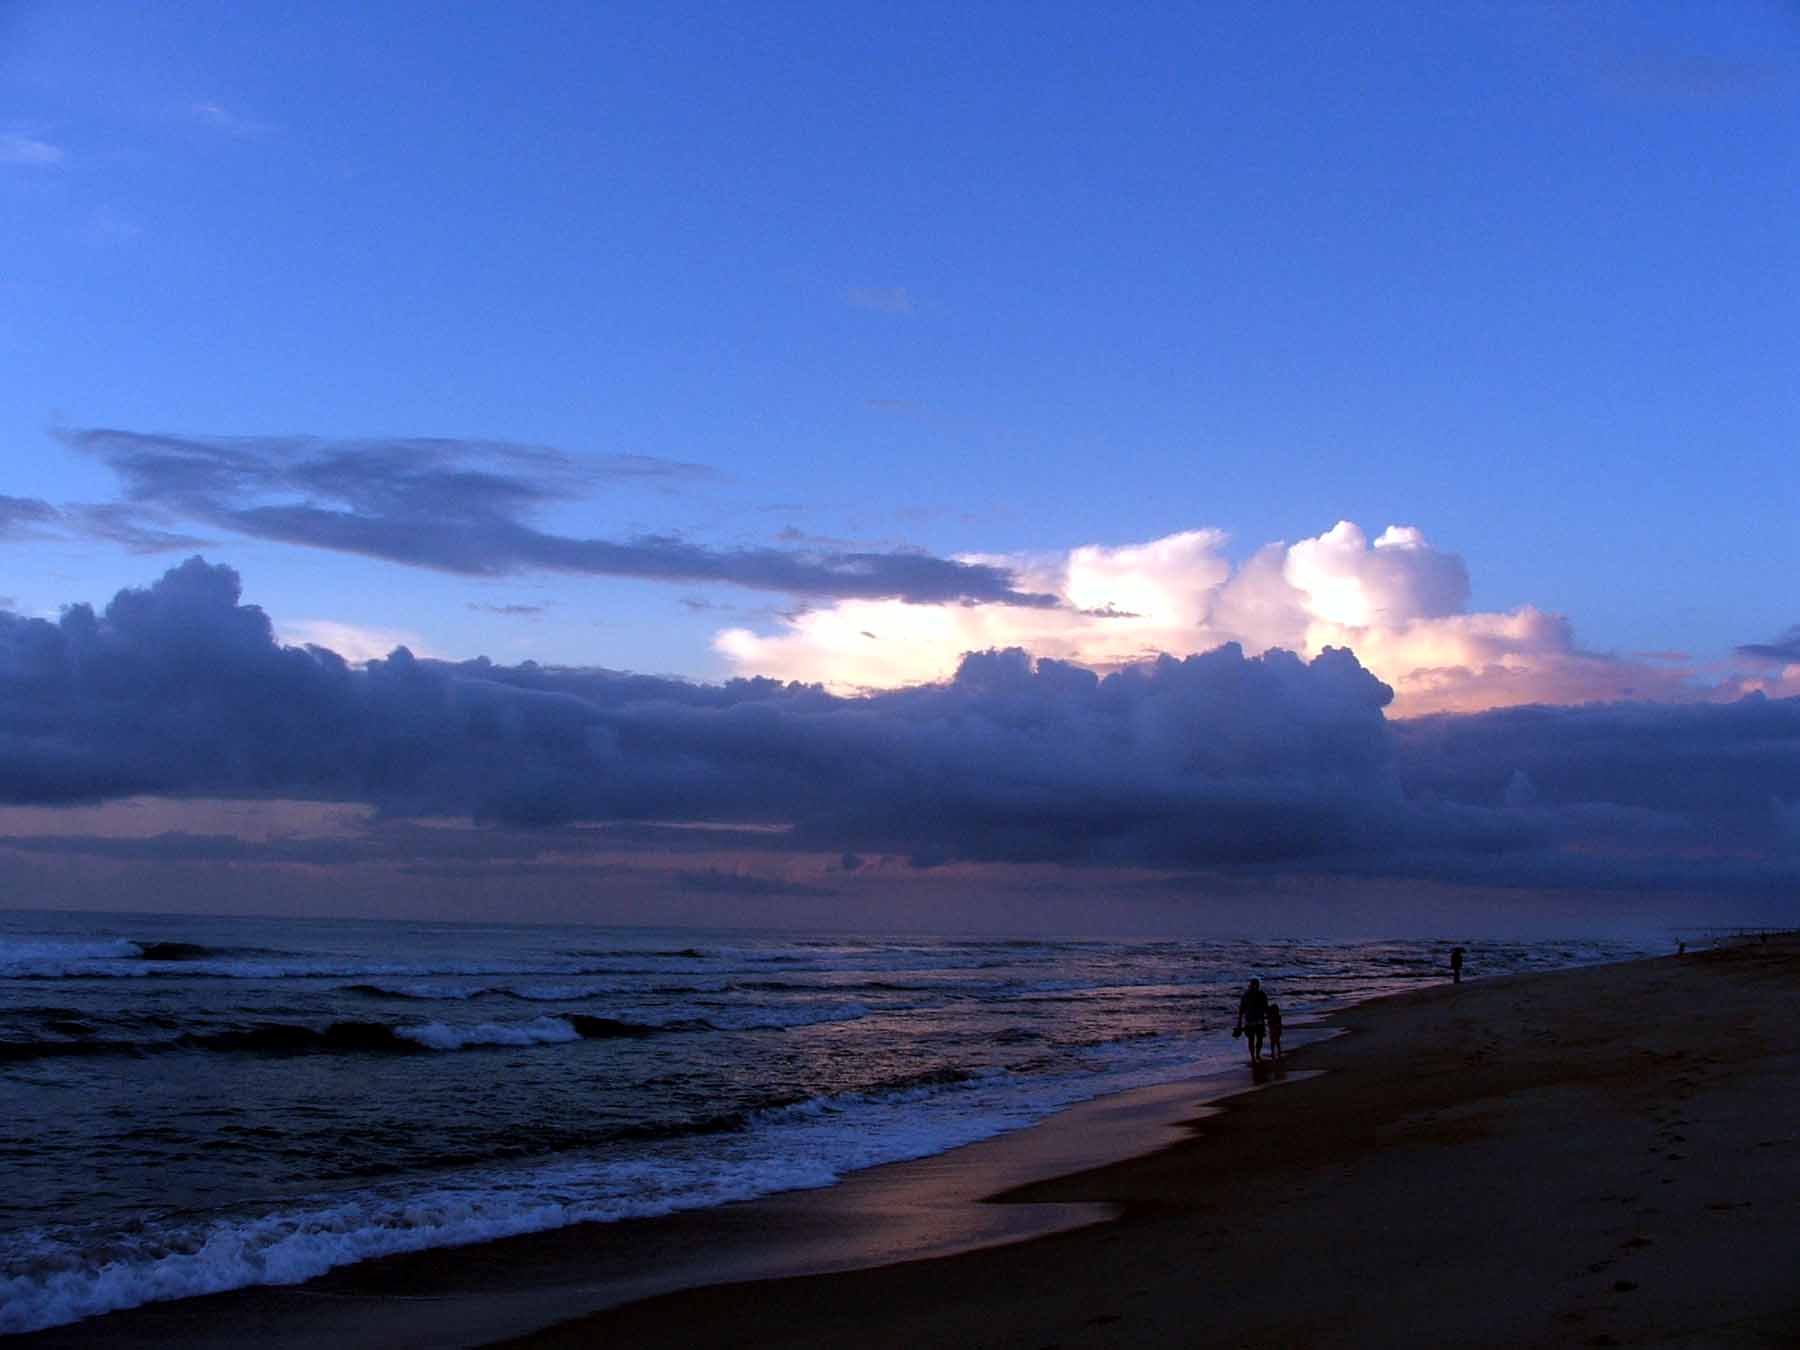 daybreak, Outer Banks, photo by Tammy Vitale